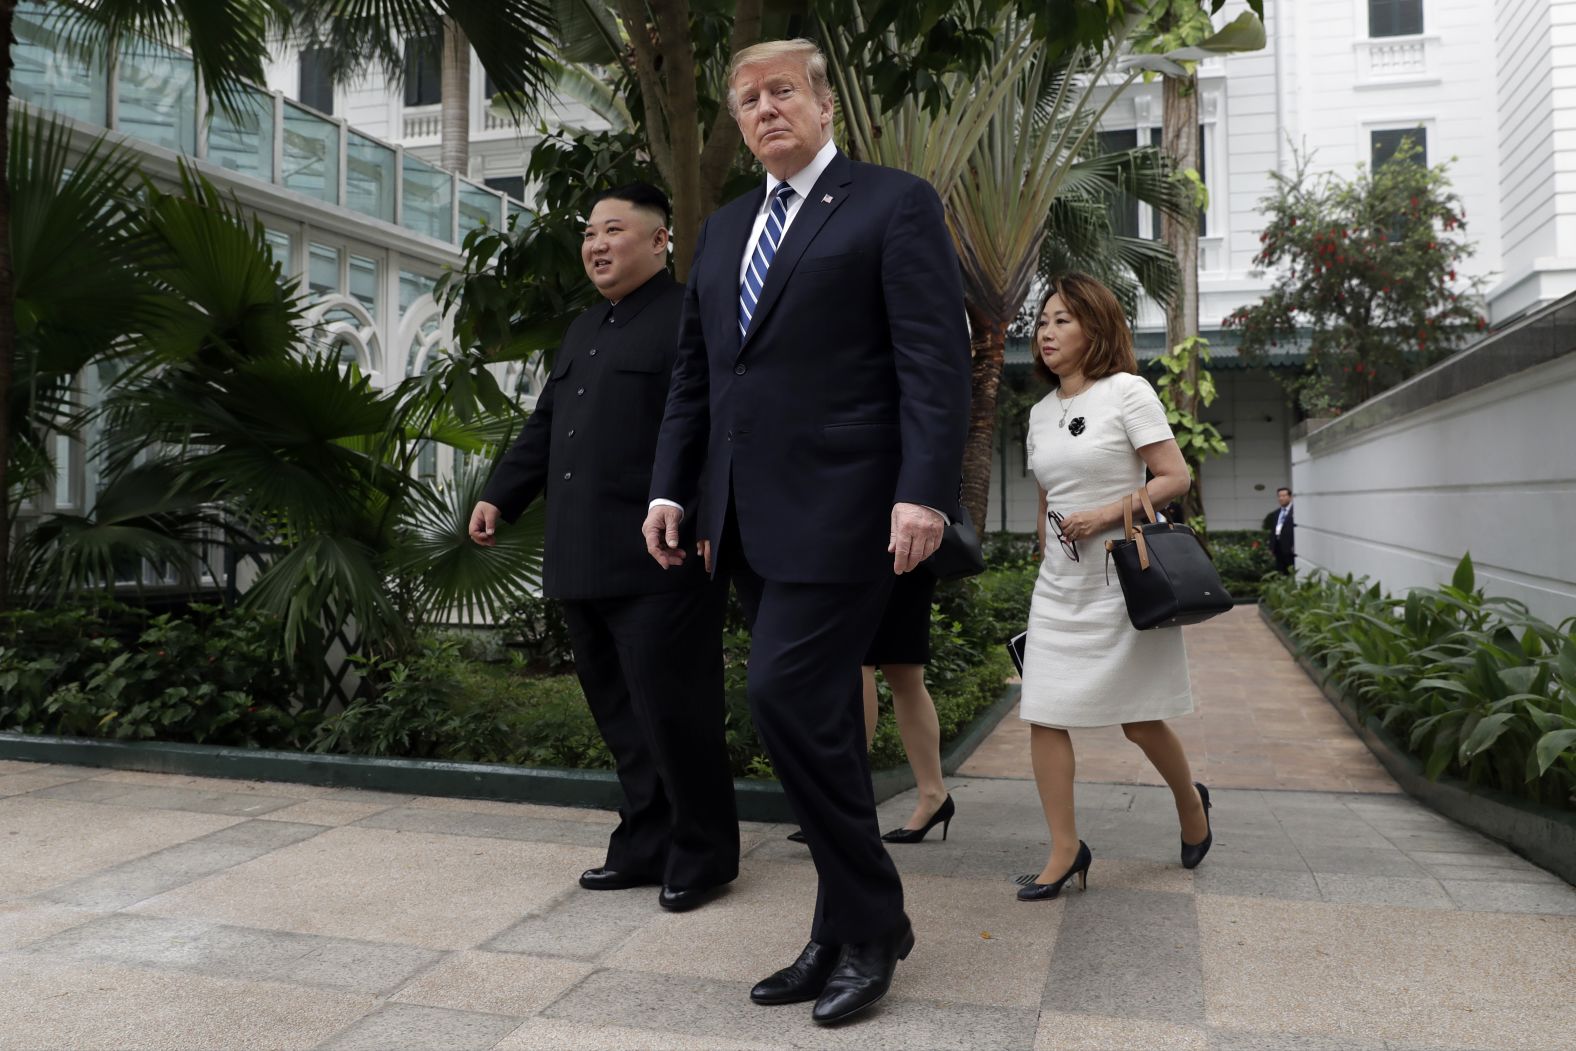 Trump and Kim are trailed by interpreters as they take a walk together at the Hotel Metropole in Hanoi on February 28.